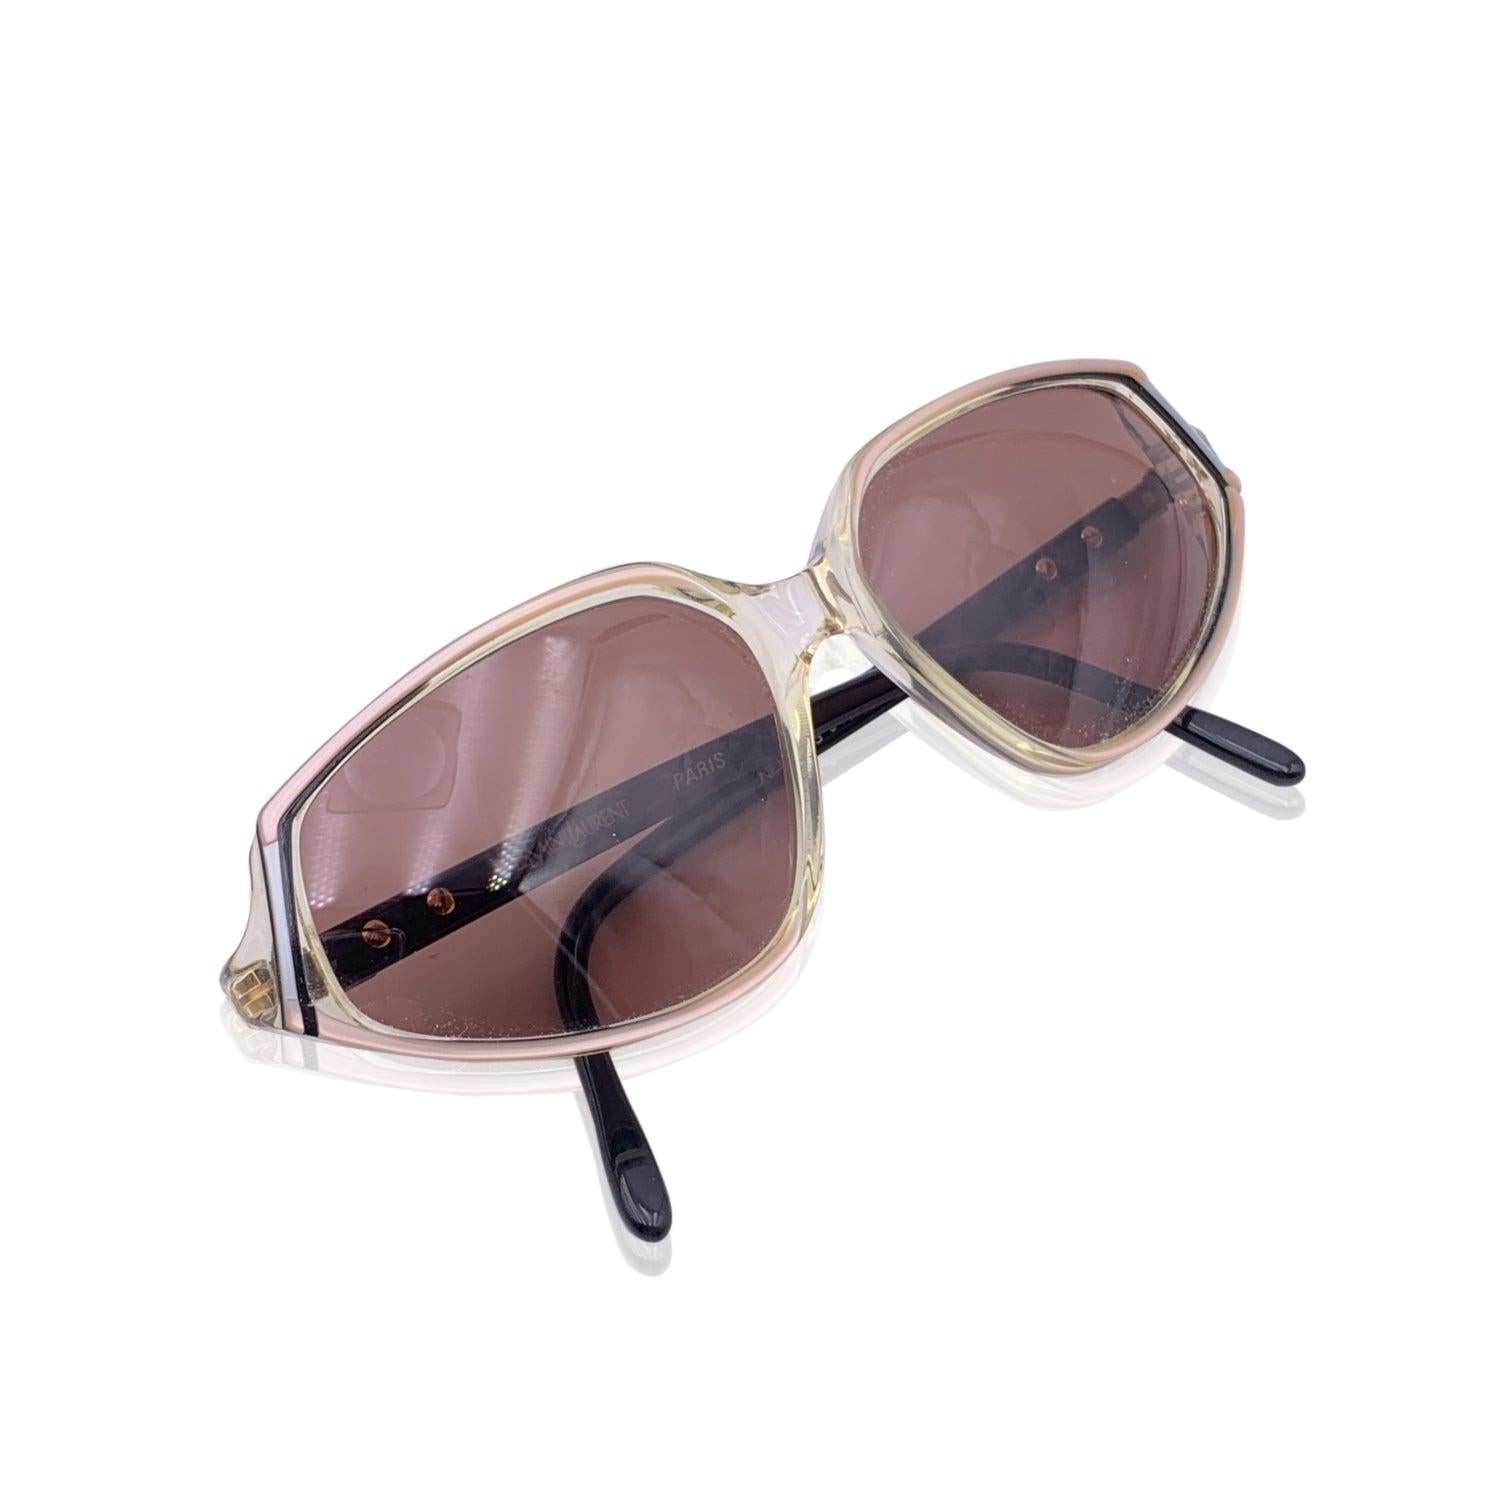 Vintage YVES SAINT LAURENT sunglasses. Mod: NEMESIS - 58/14 - 505. Clear, pink and Black frame cat-eye style frame, with gold metal hardware & YSL logo on the sides. Brown 100% GRADIENT UV lens. Made in France Details MATERIAL: Acetate COLOR: Beige